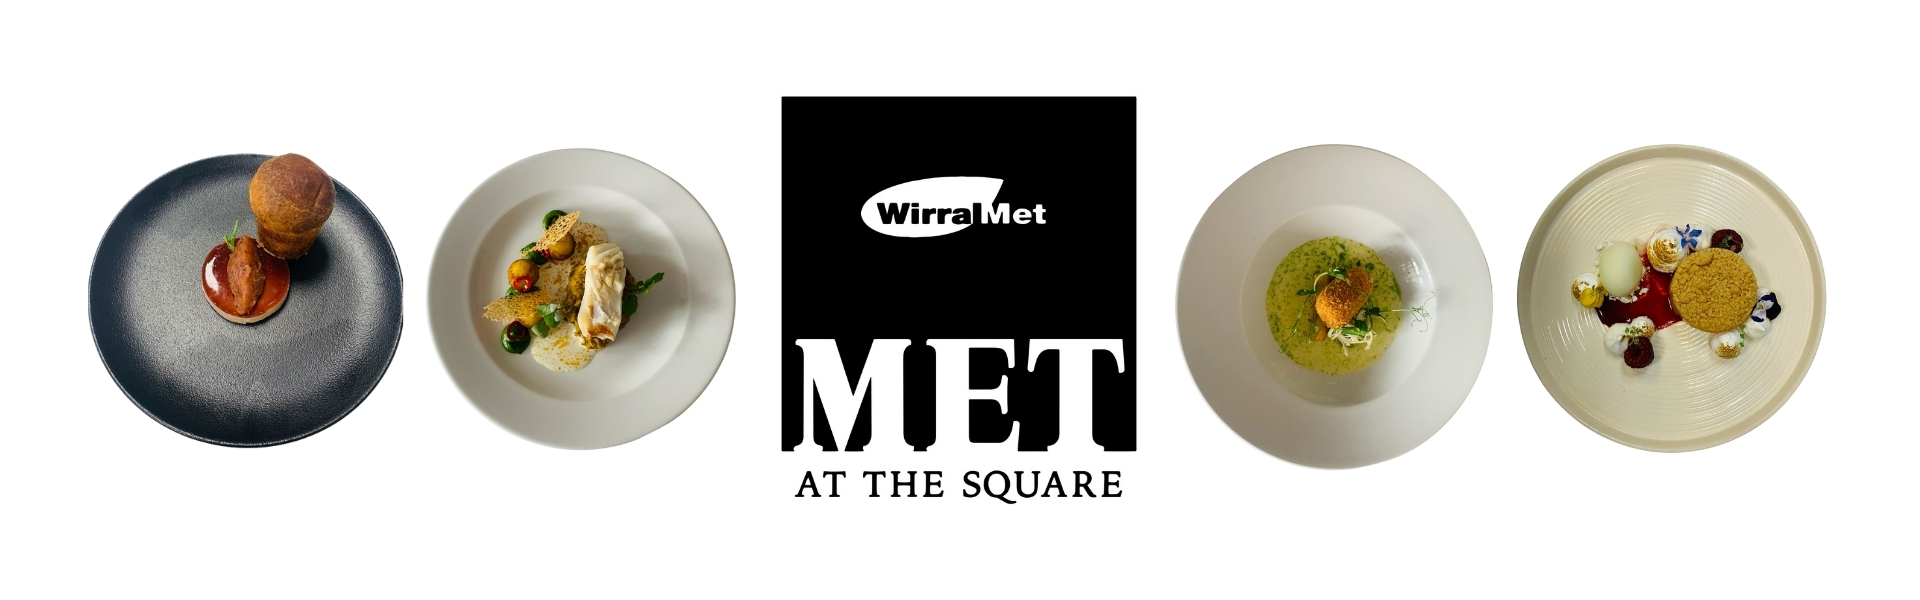 met at the square food and logo